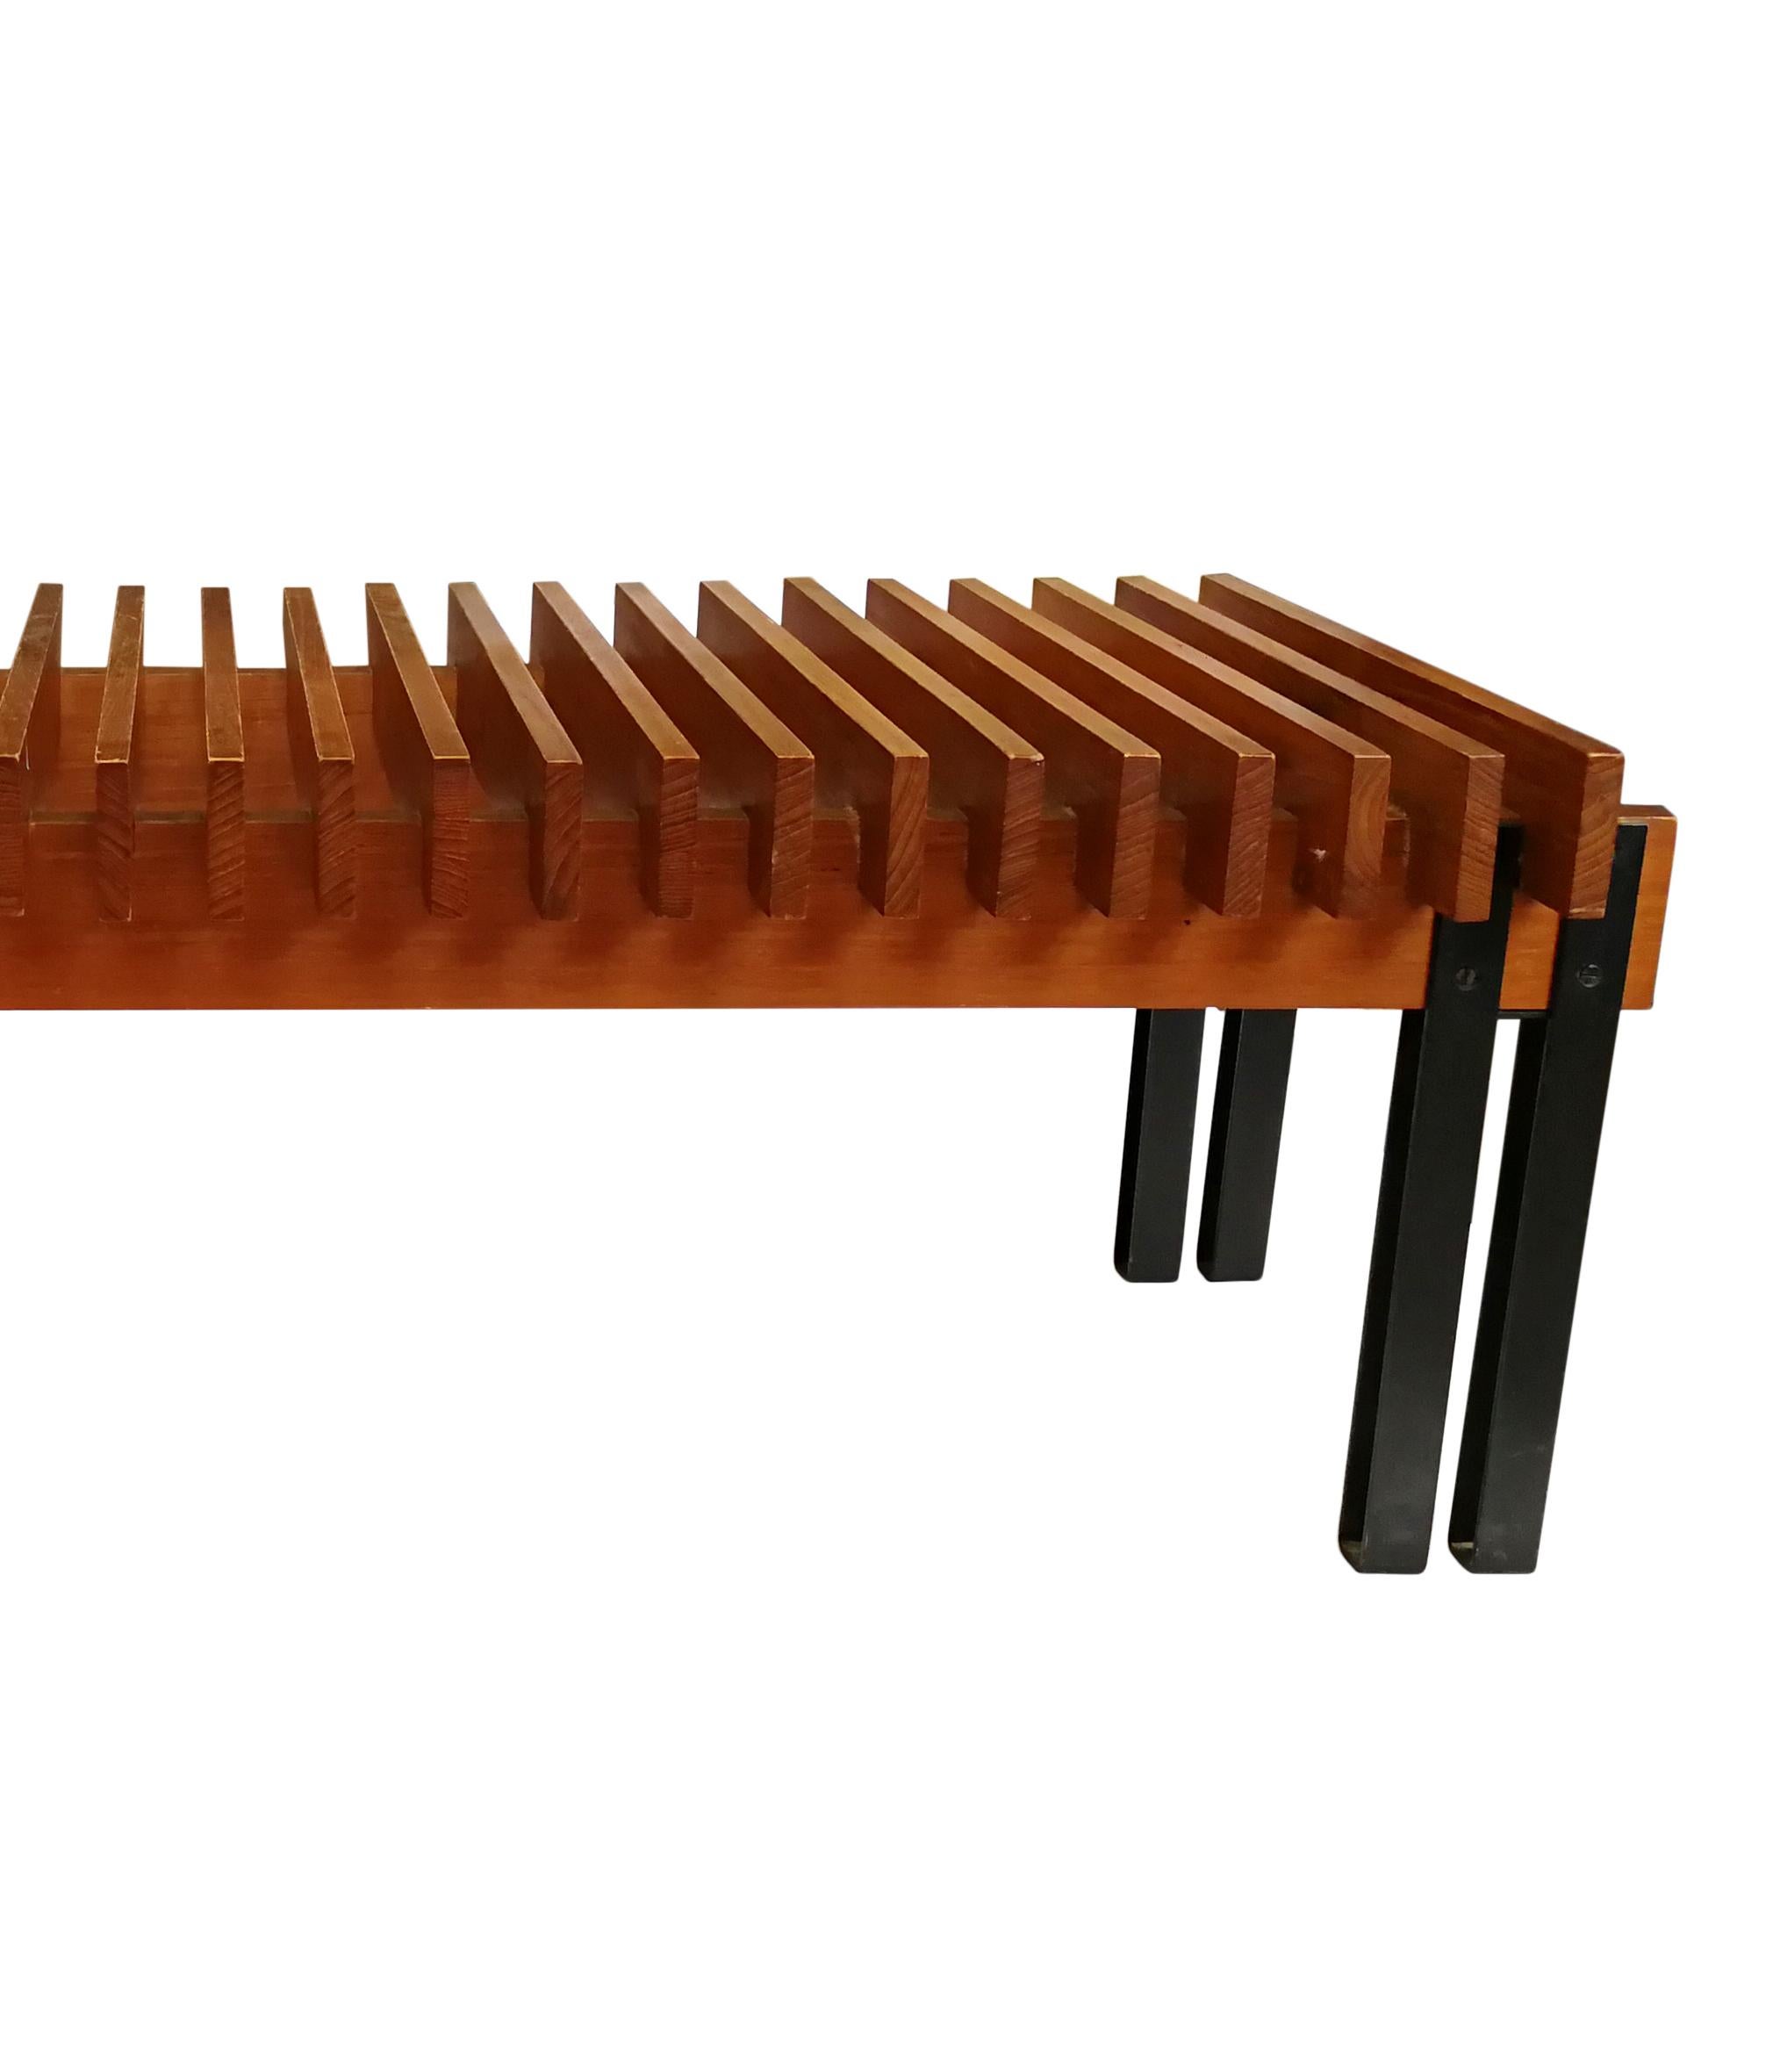 Vintage Wood Teak Bench in Lacquered Metal, Italian Production, 1960s For Sale 1